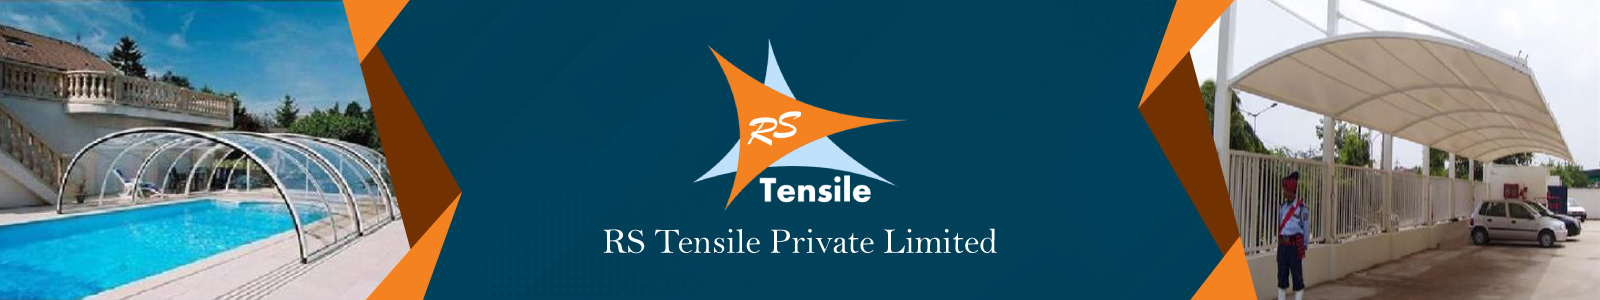 RS TENSILE PRIVATE LIMITED